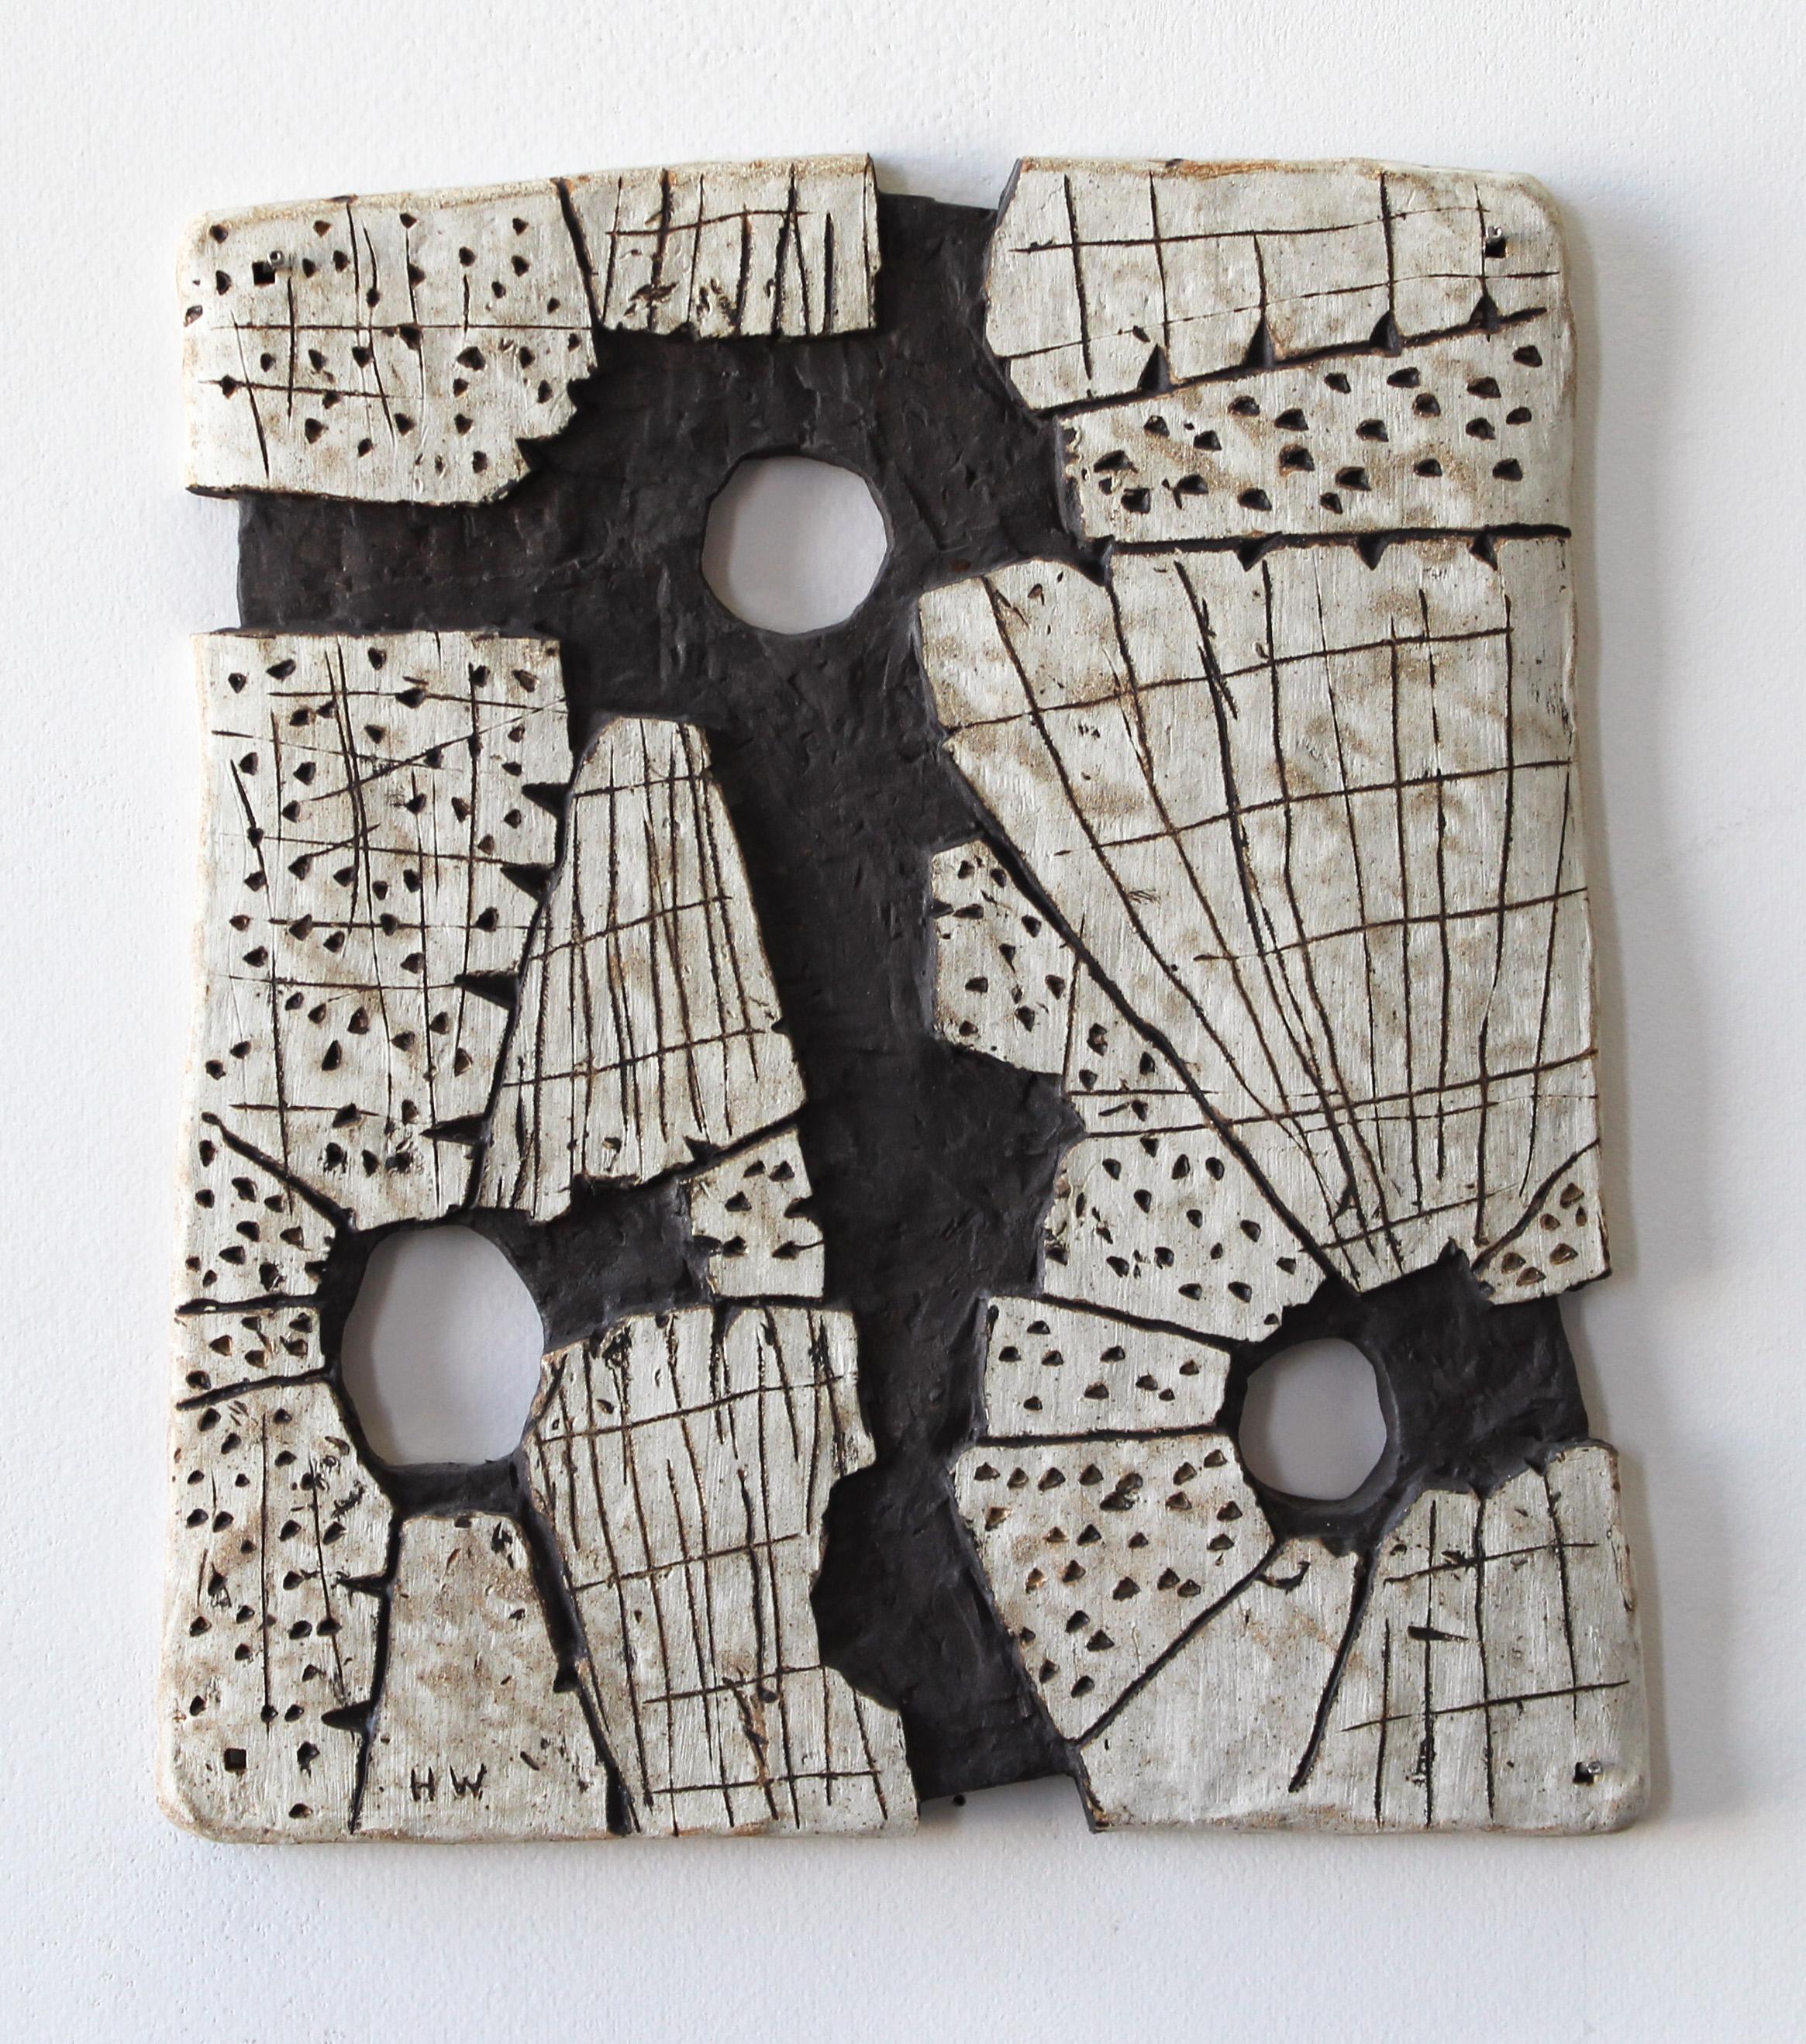 Harold Wortsman Abstract Sculpture - "MEMORY OF... FOR SB", sculpture, clay, relief, abstract, contemporary, ceramic